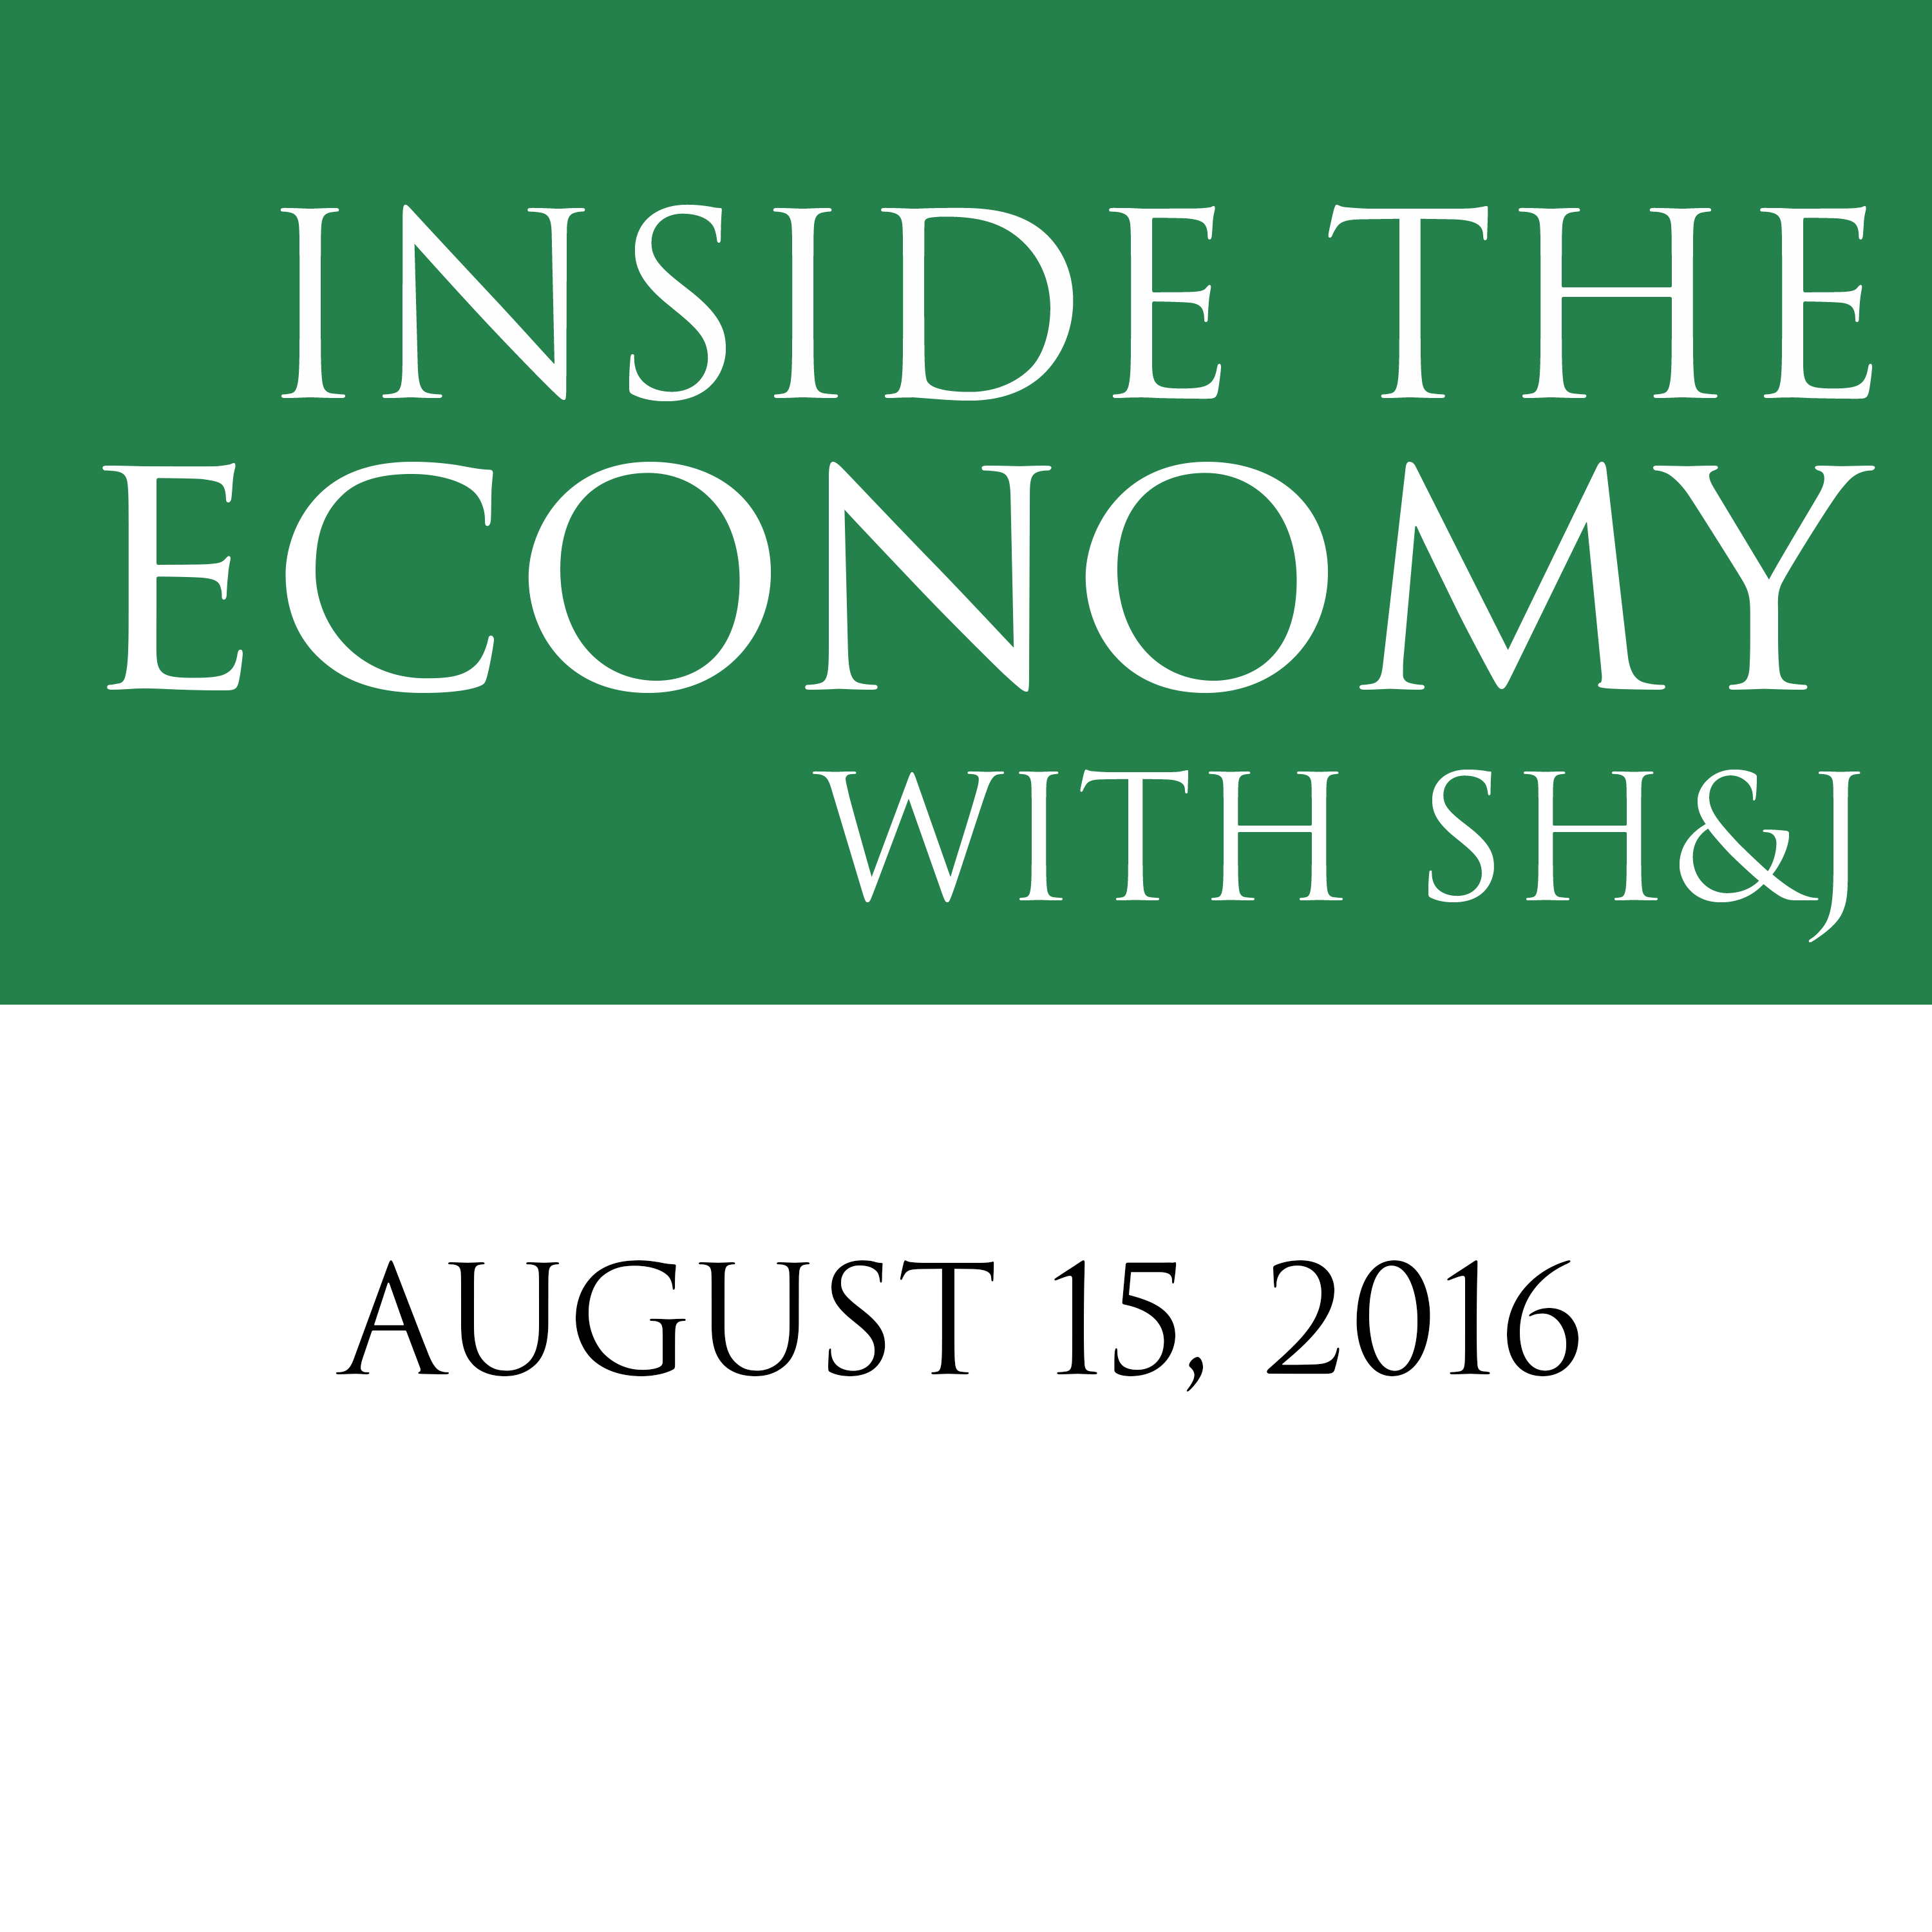 August 15, 2016  --  Inside the Economy with SH&J